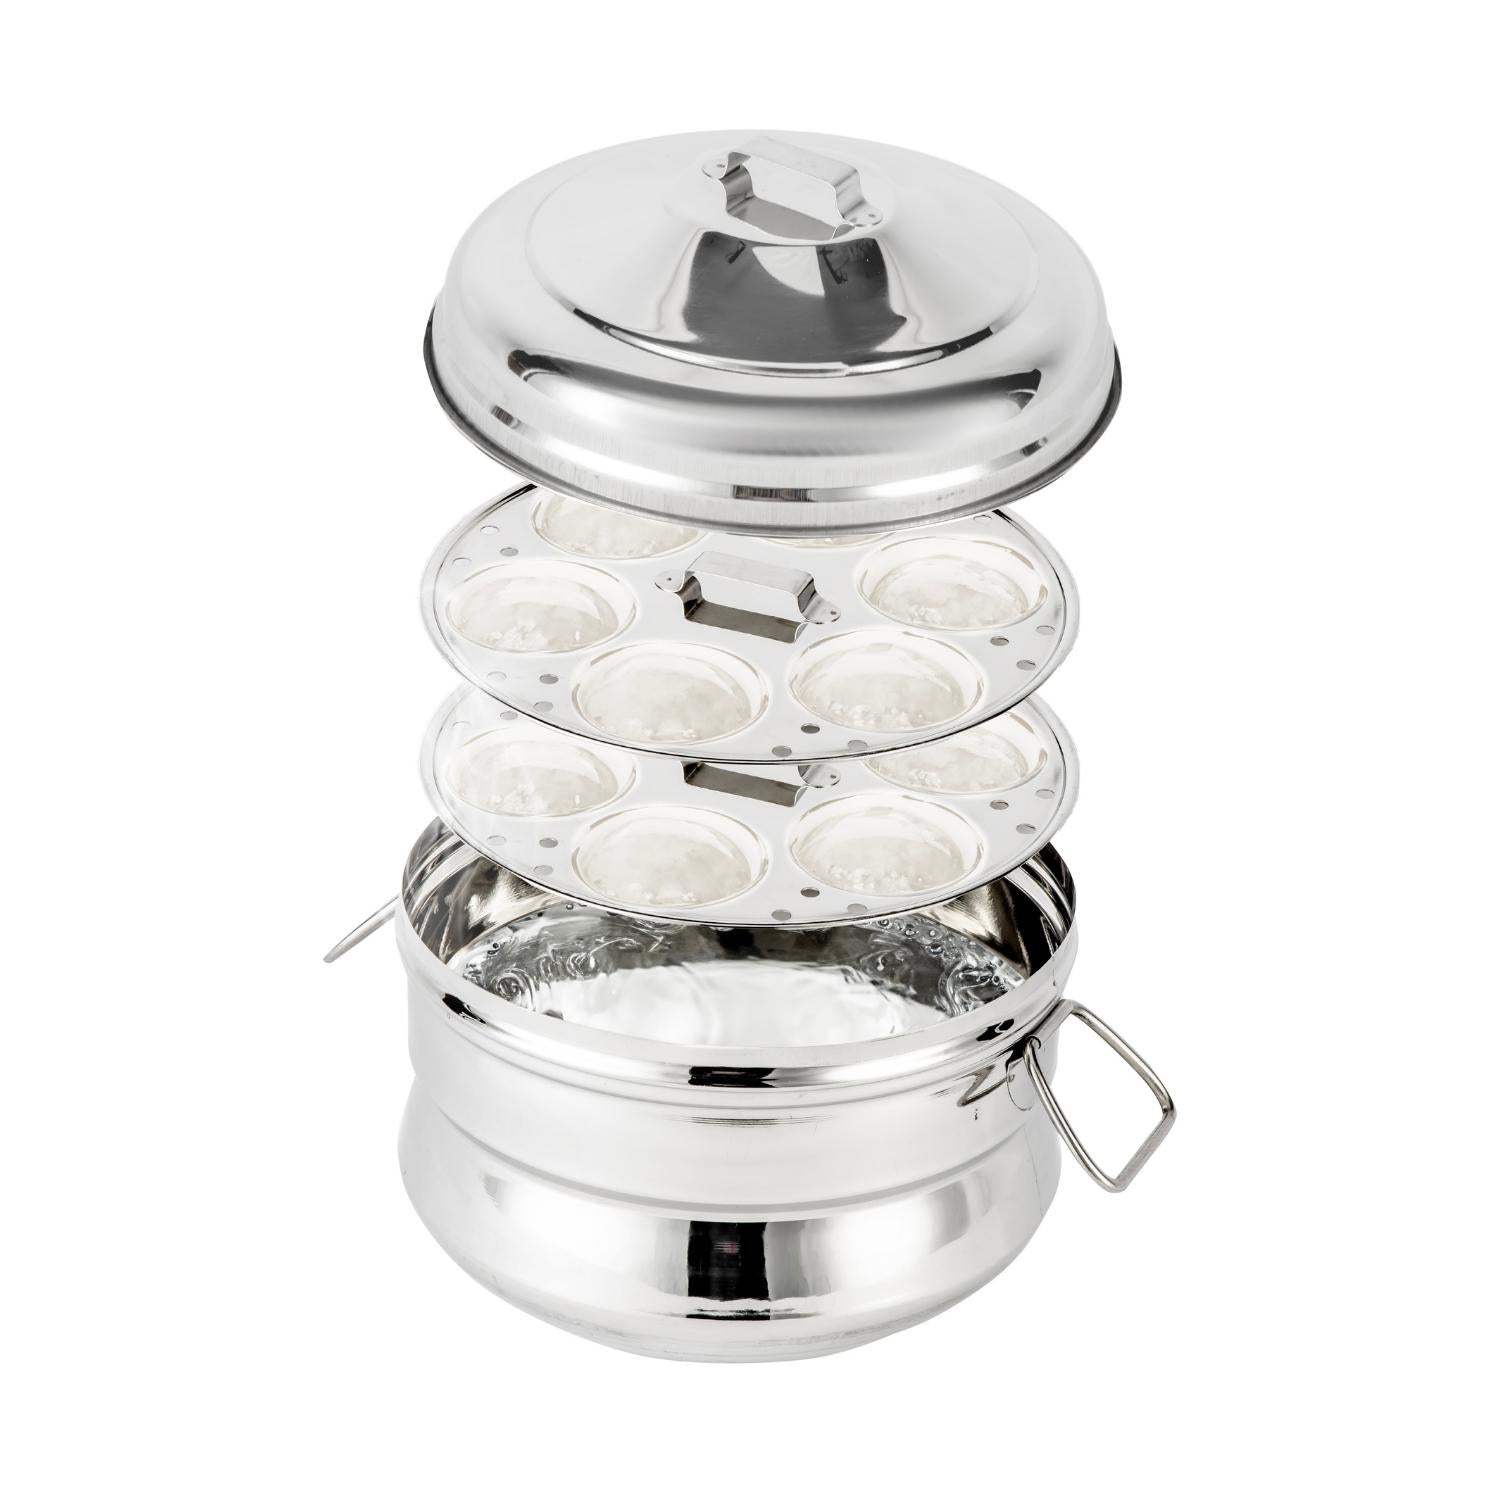 Two-Tier Stainless Steel Idly Steamer Pot With Handles